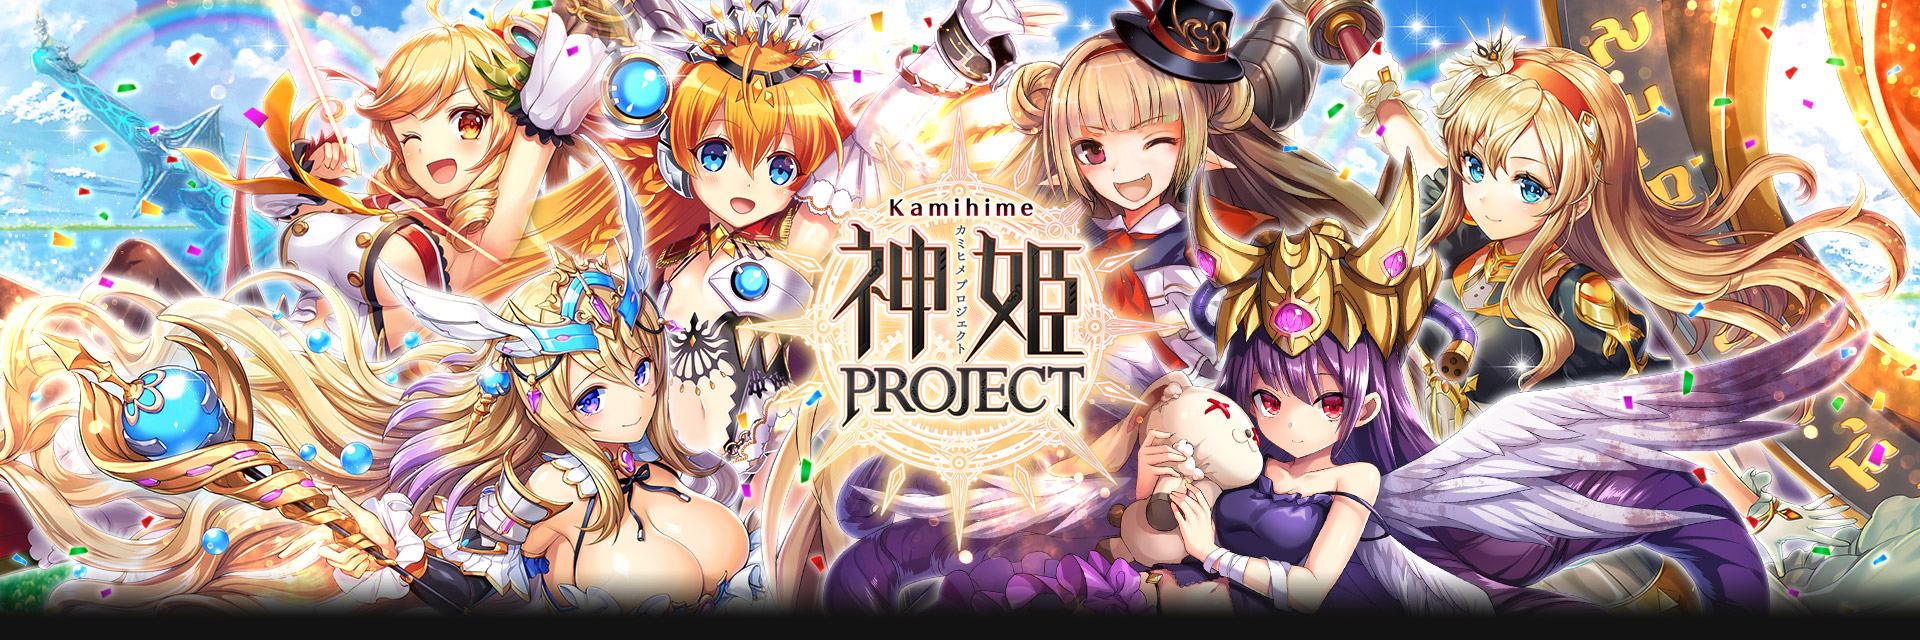 KAMIHIME PROJECT